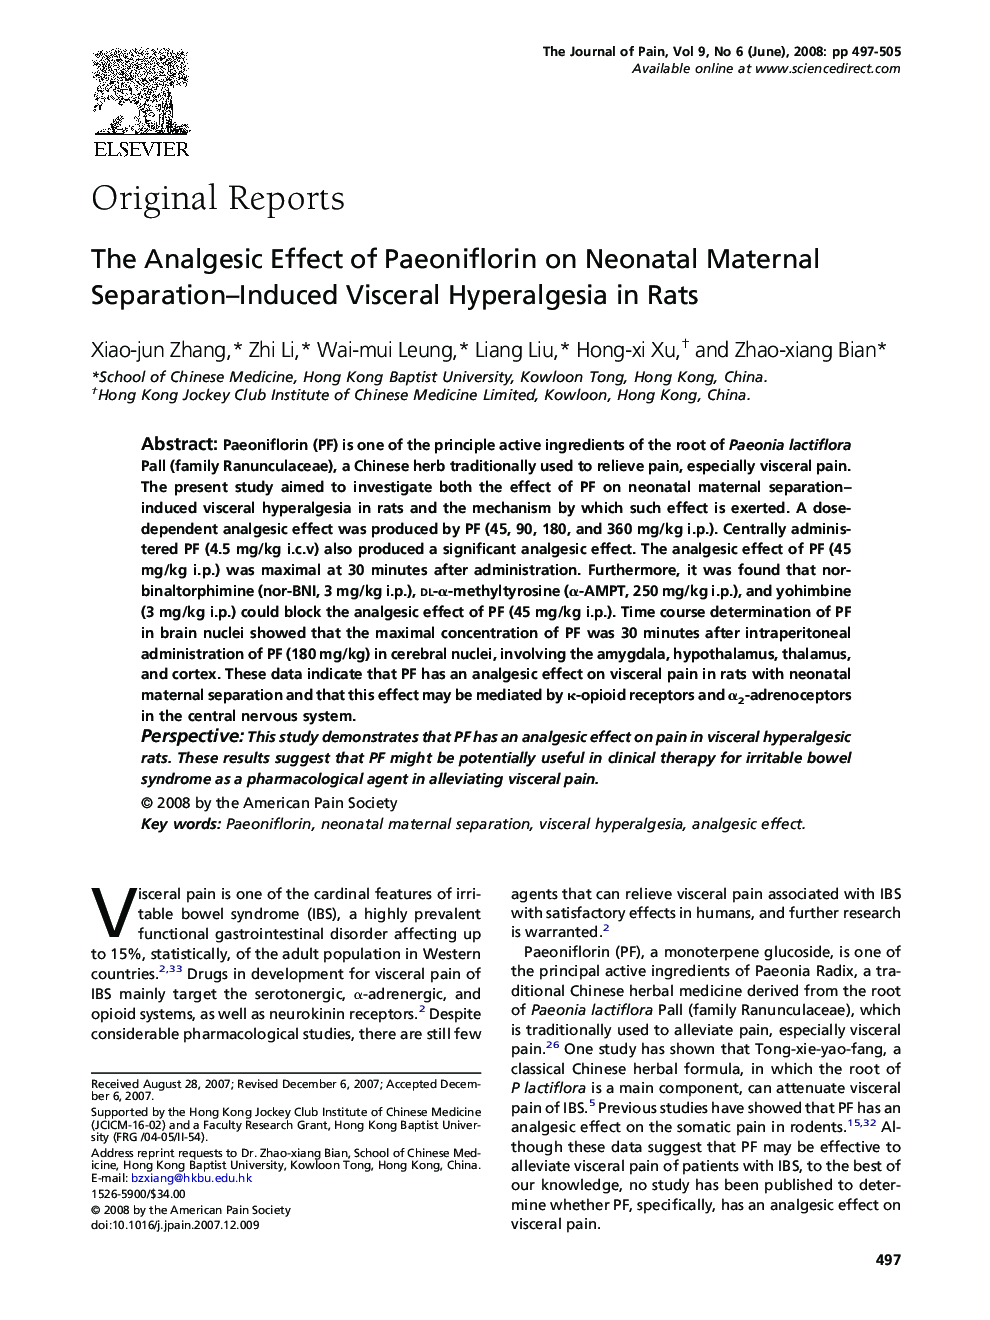 The Analgesic Effect of Paeoniflorin on Neonatal Maternal Separation–Induced Visceral Hyperalgesia in Rats 